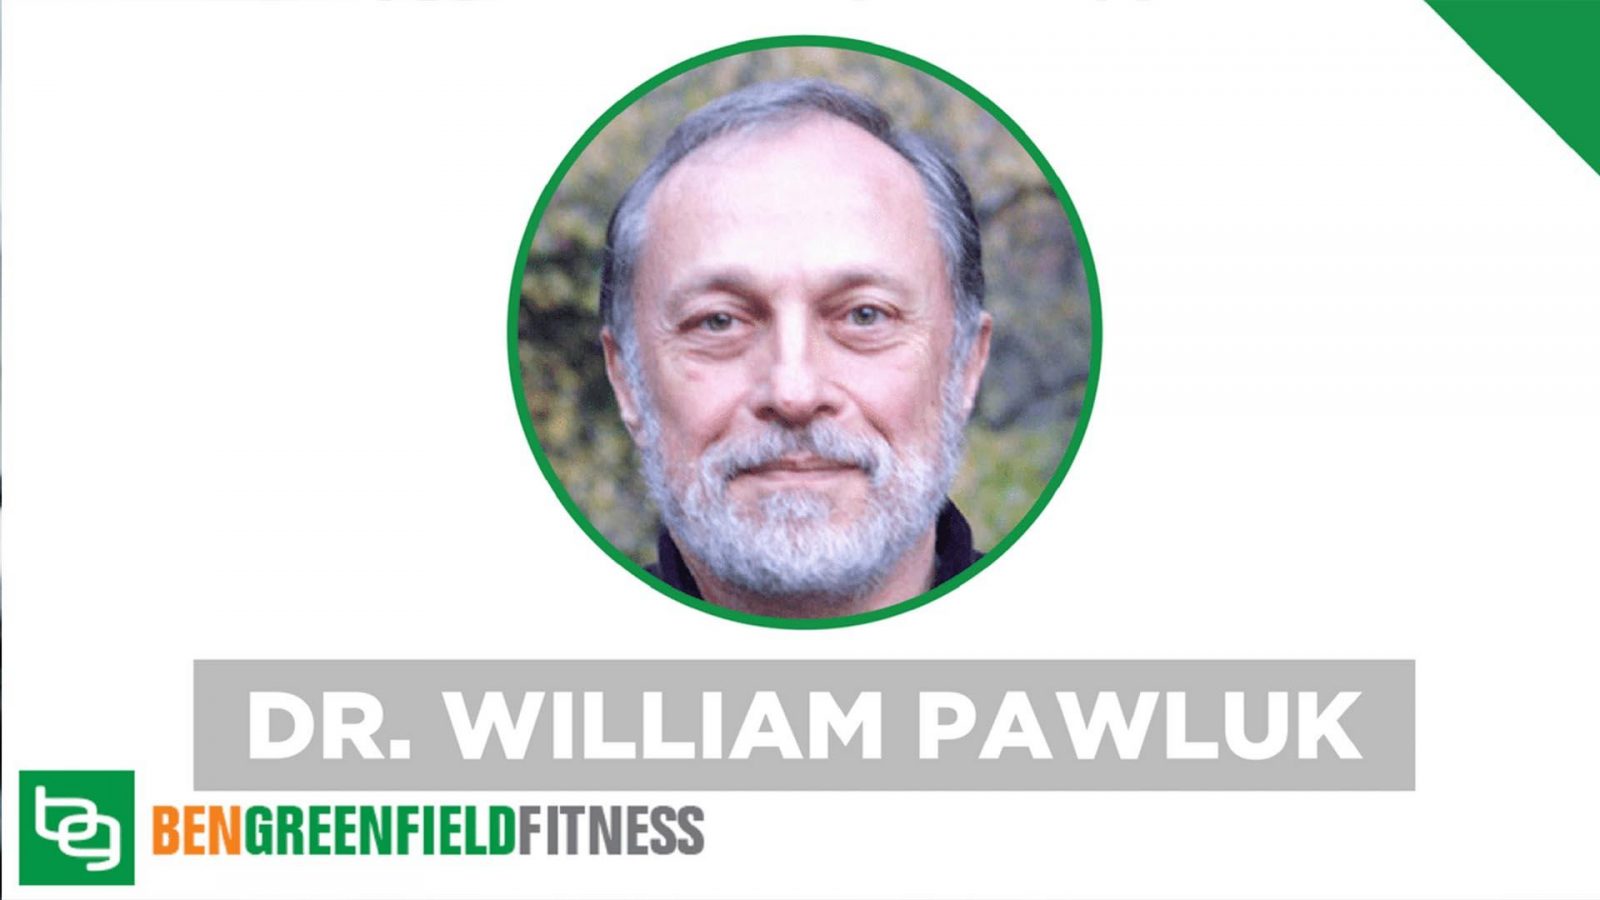 Dr. William Pawluk and Ben Greenfield Fitness